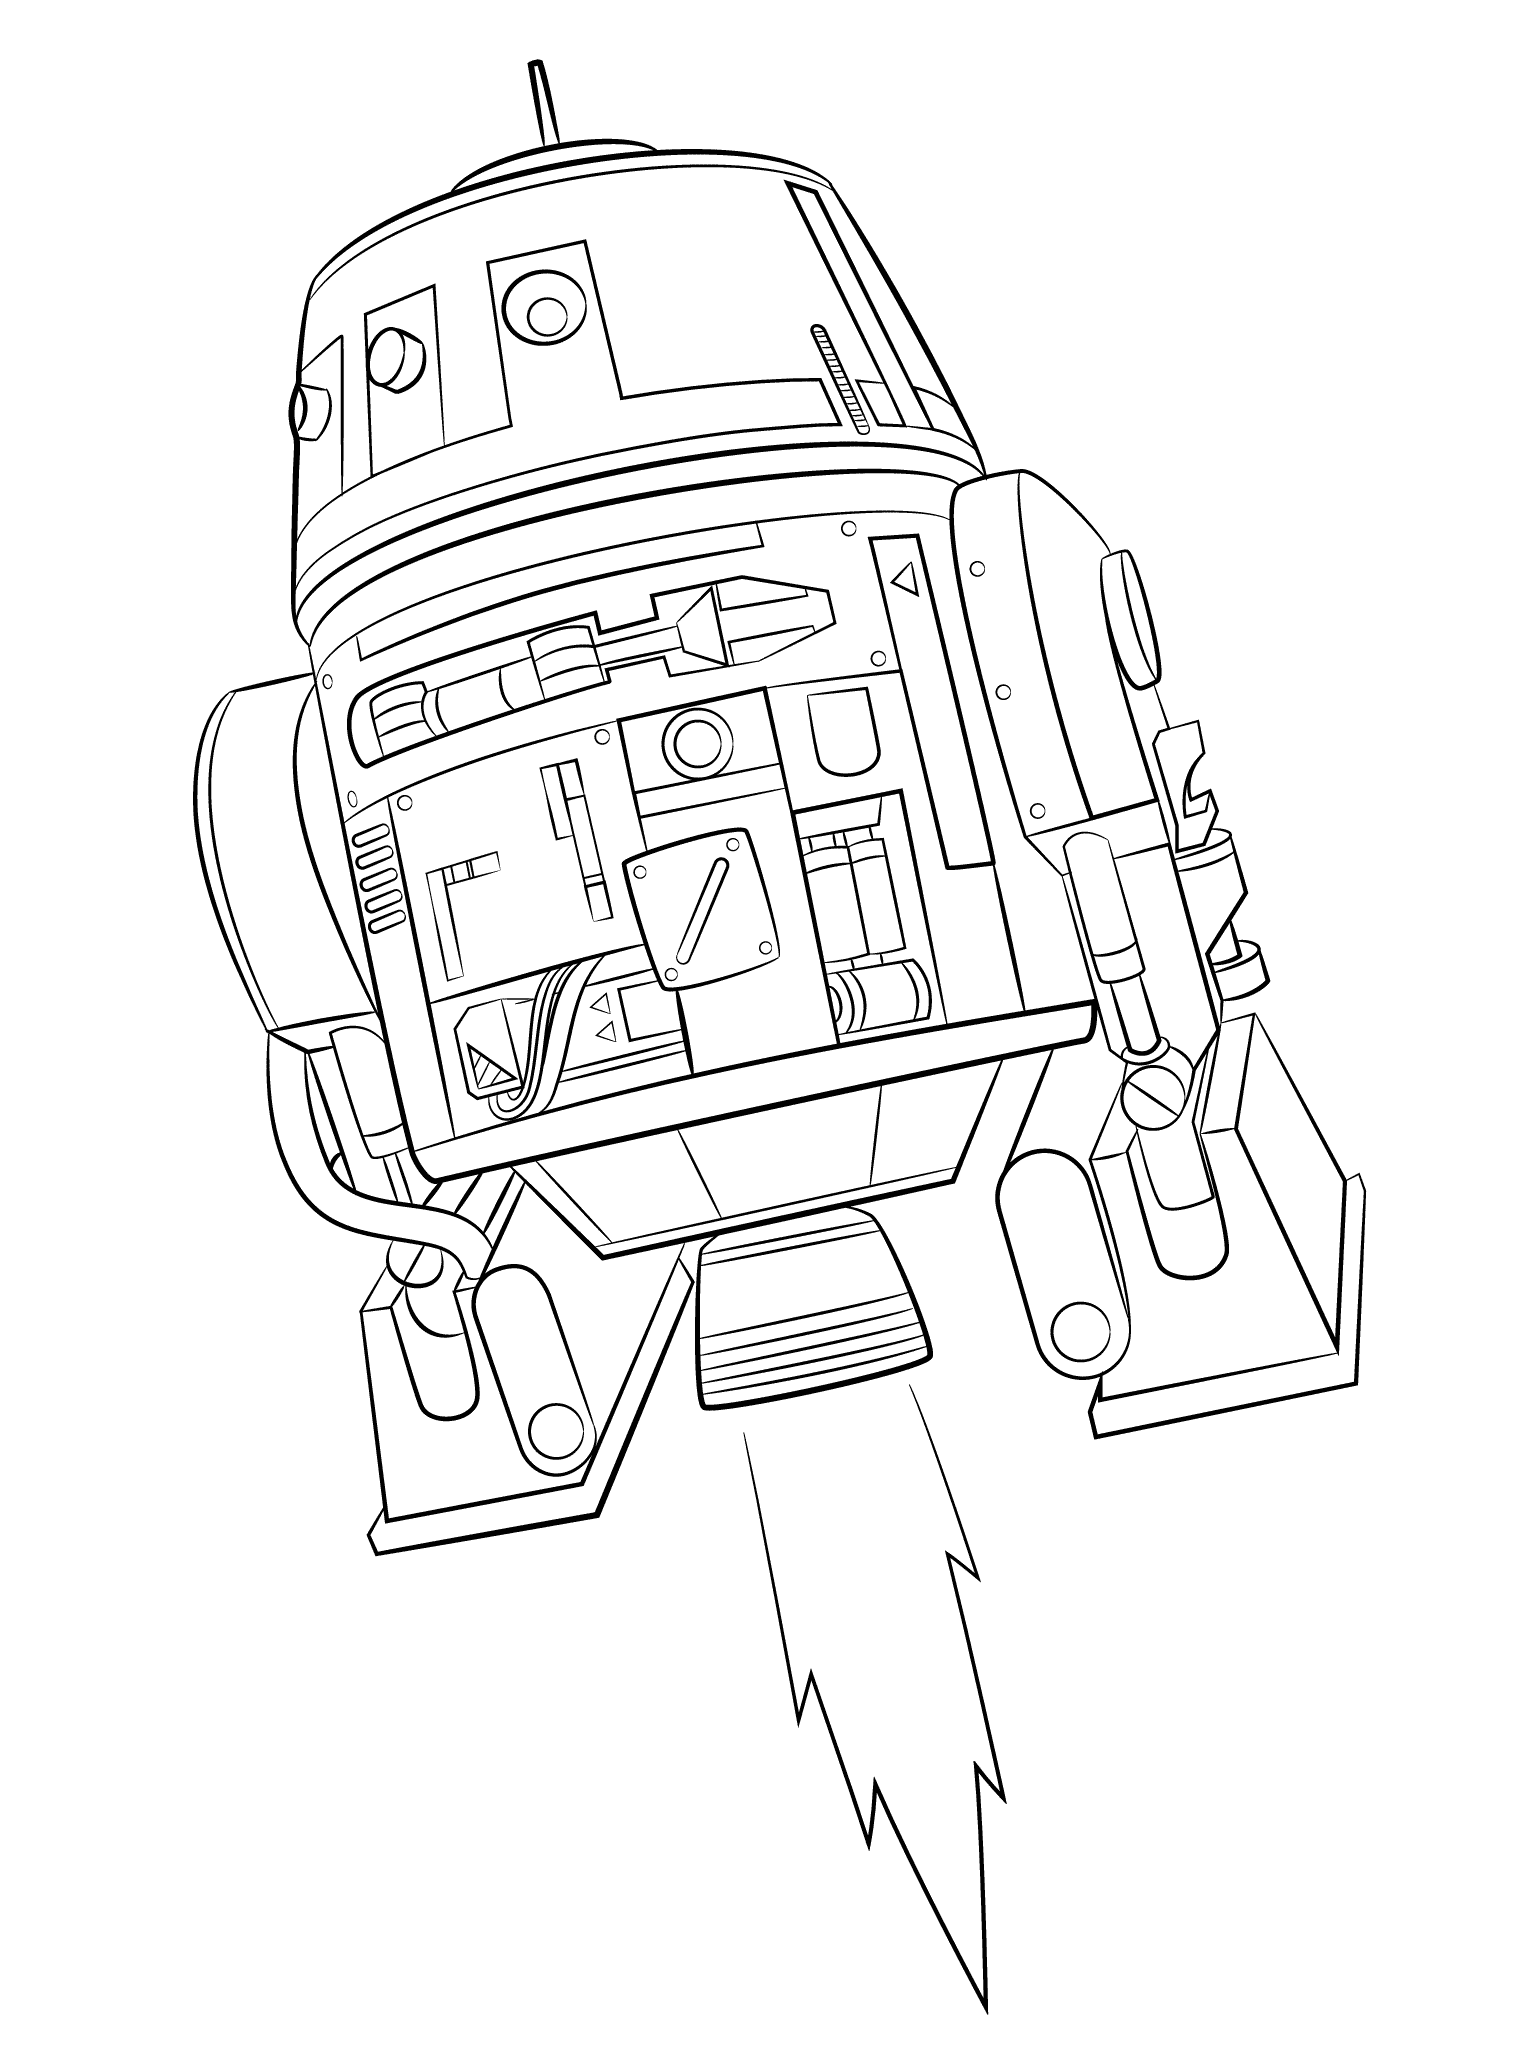 Star Wars Rebels Choppers Coloring Page